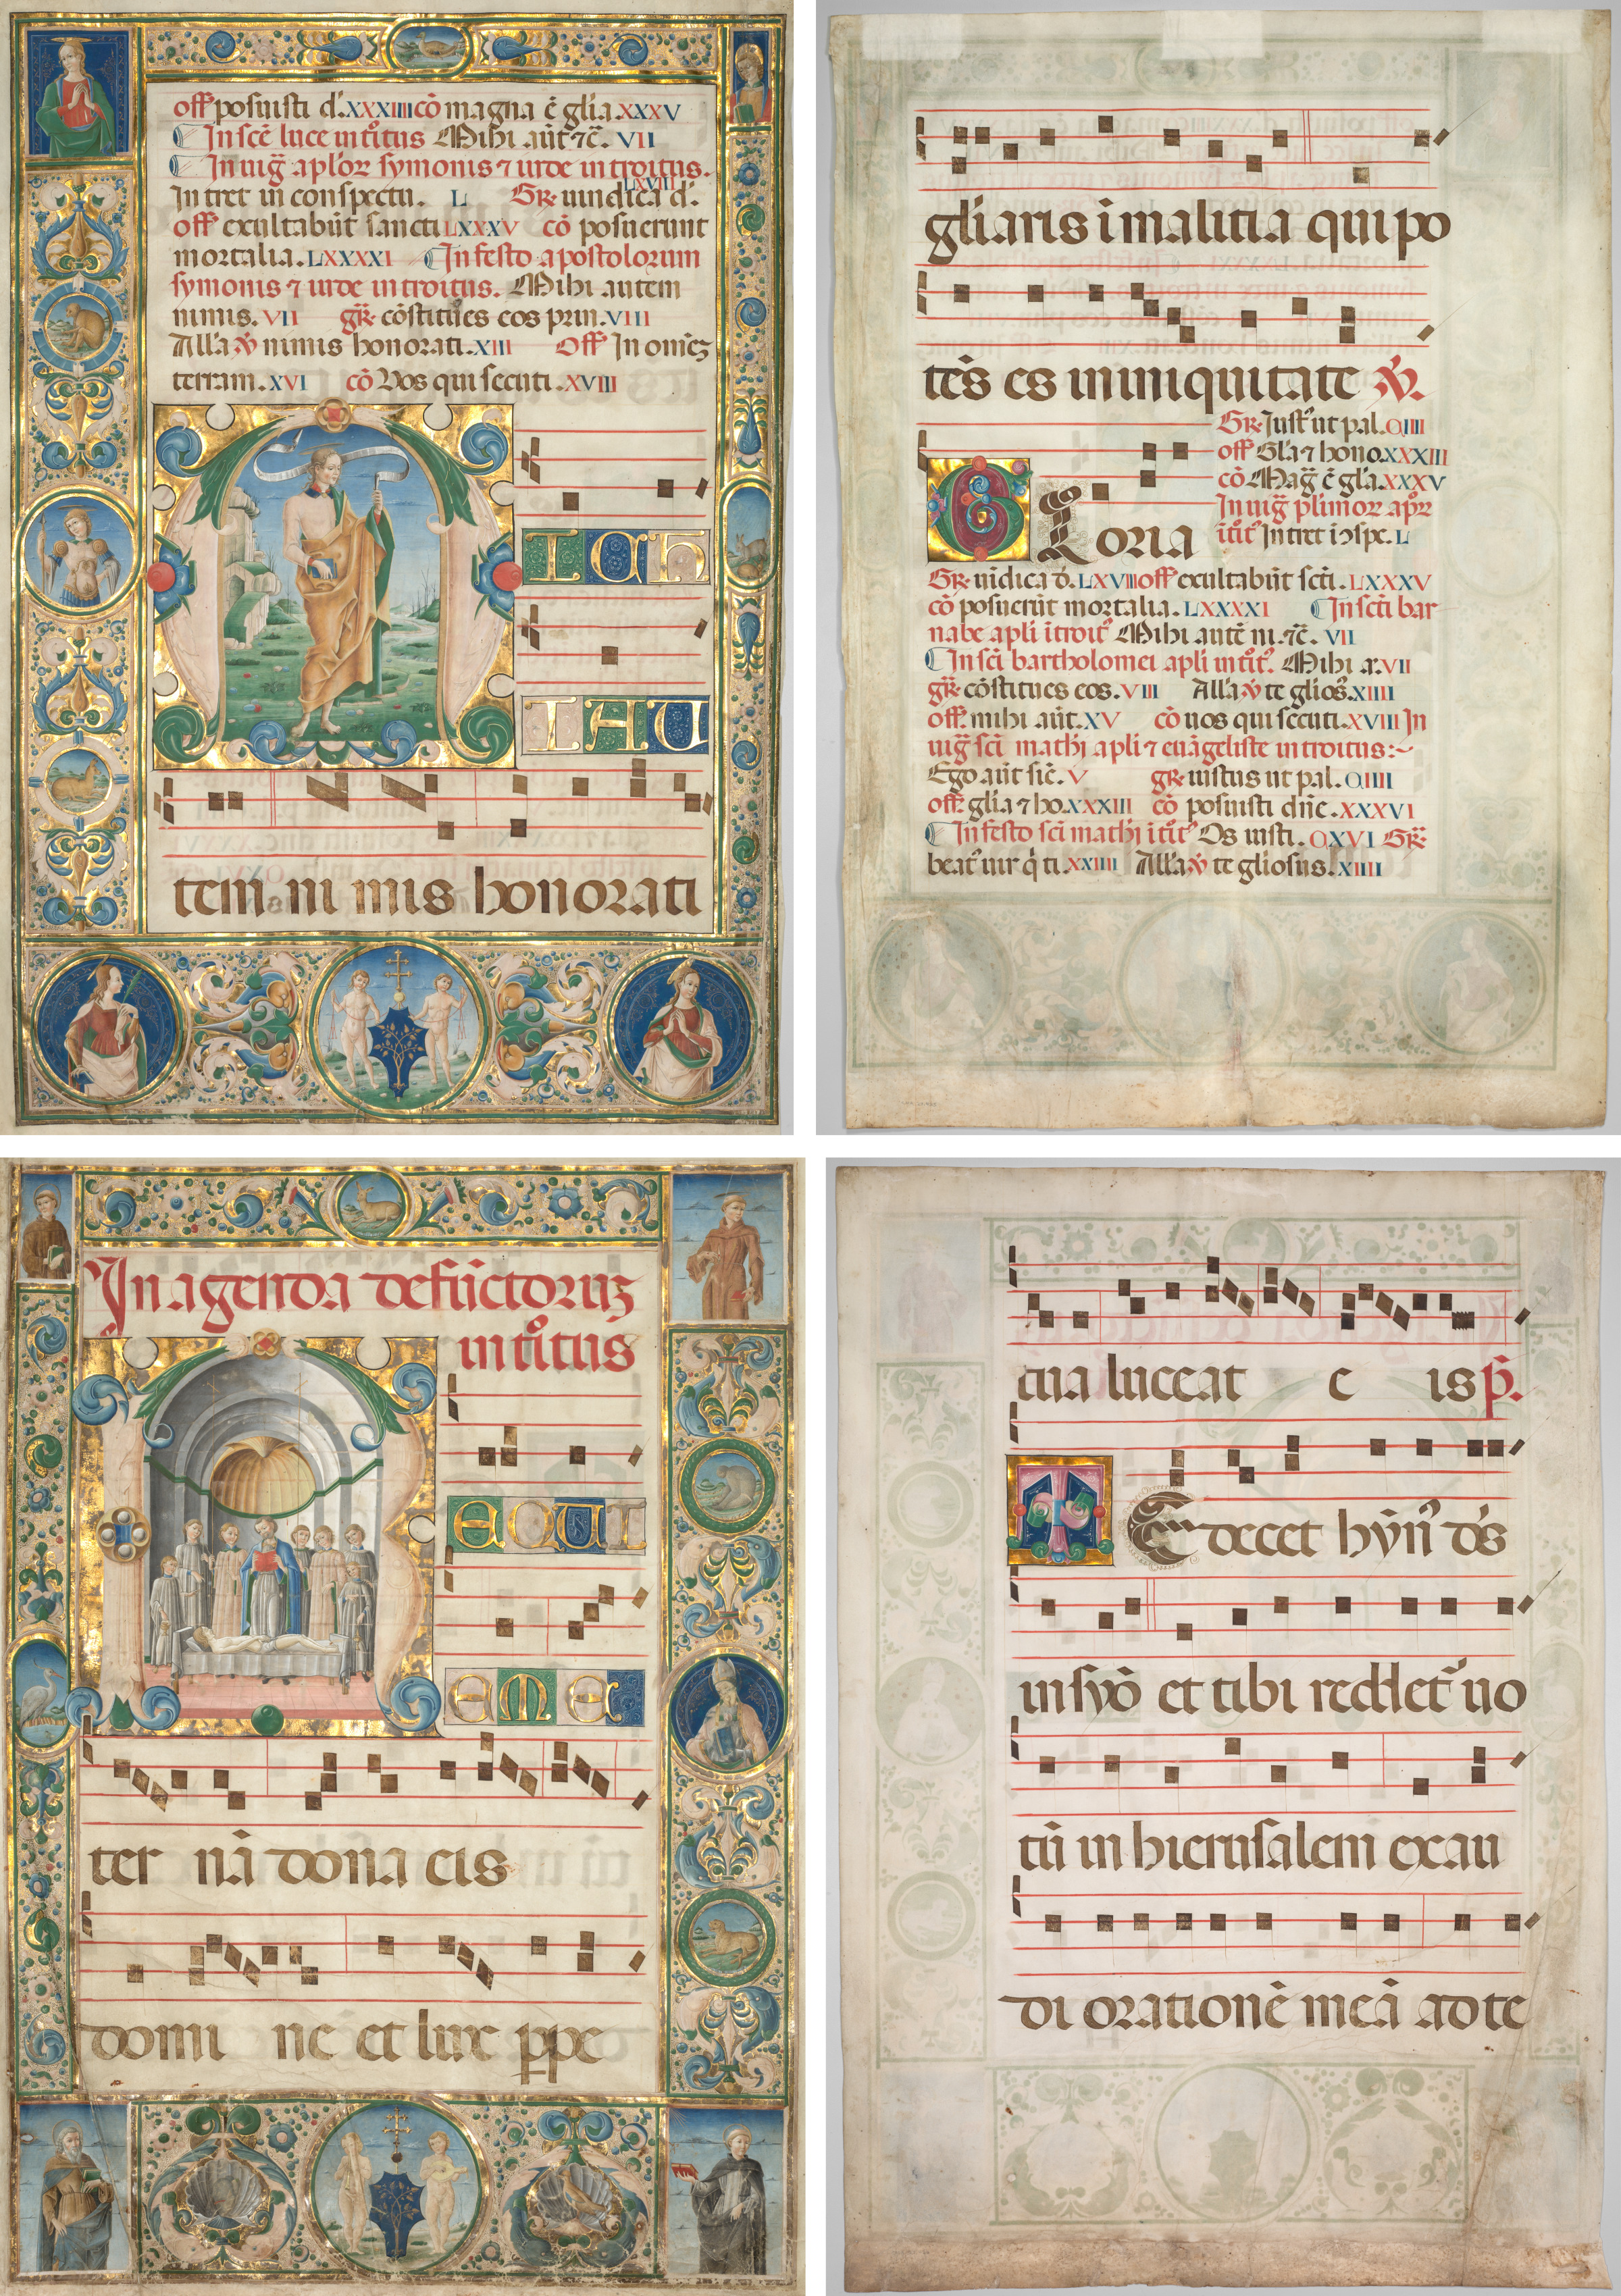 Pair of Graduals: Initial (M) with St. Andrew (recto) and Mass for the Dead (recto)